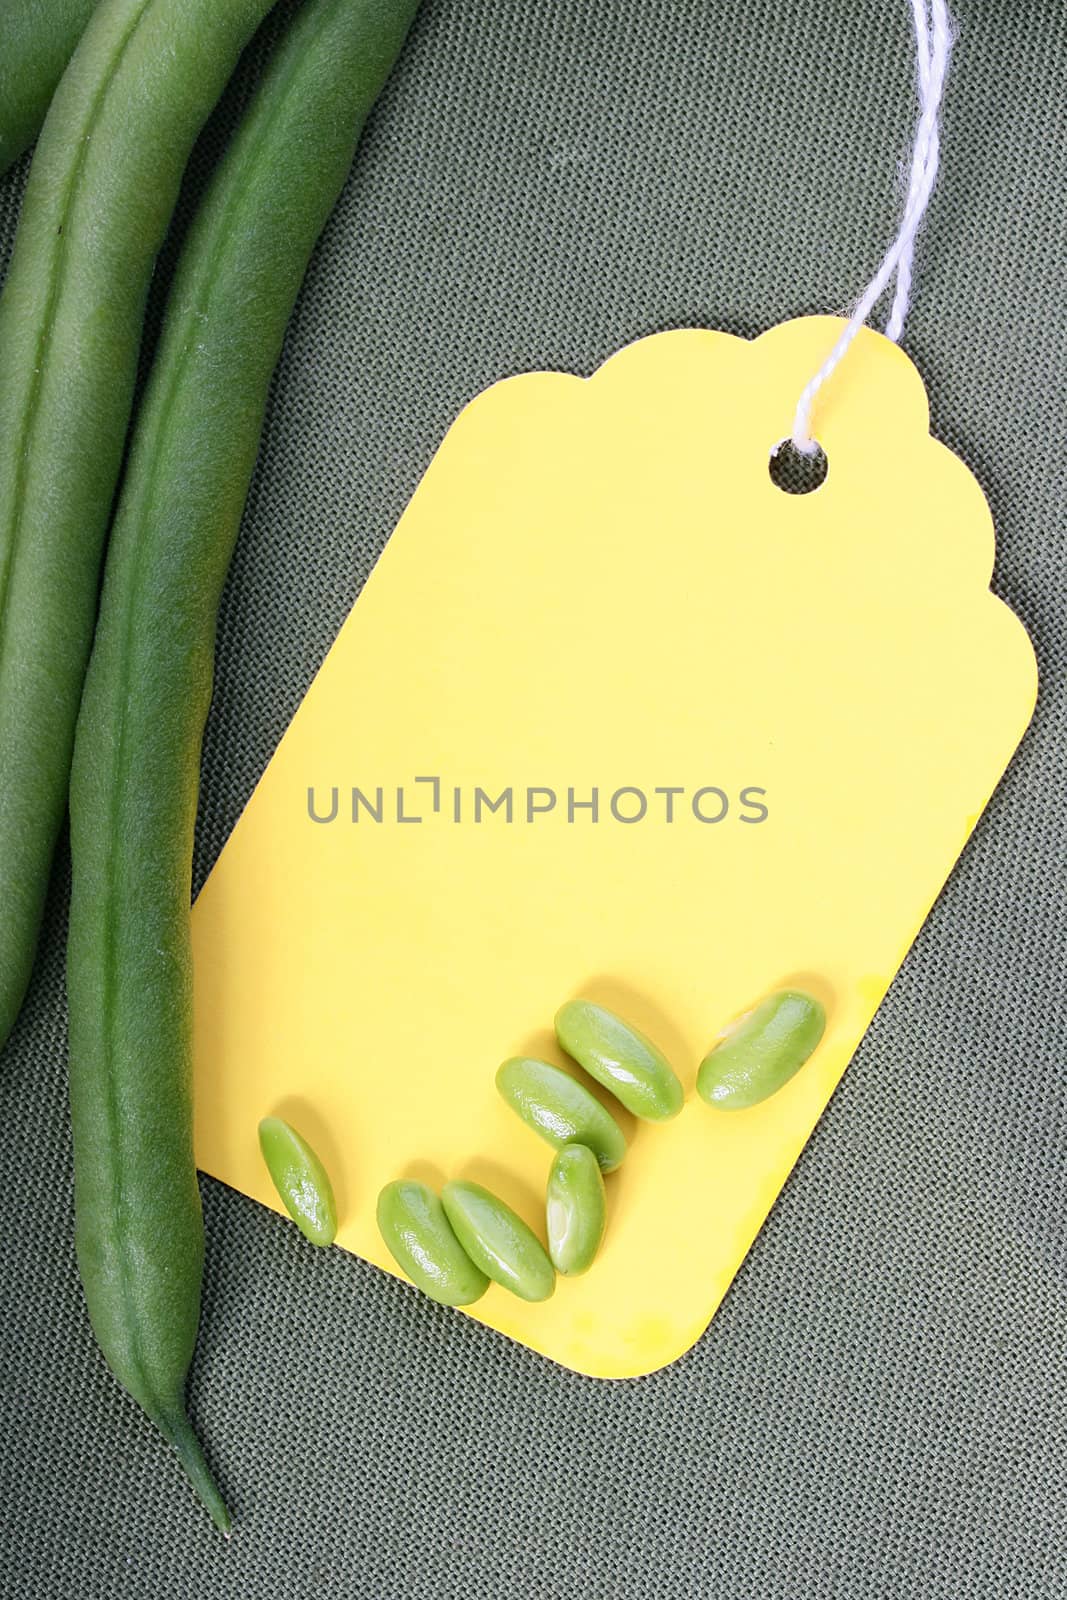 String bean in pods and beans on a napkin made of cloth with a label.